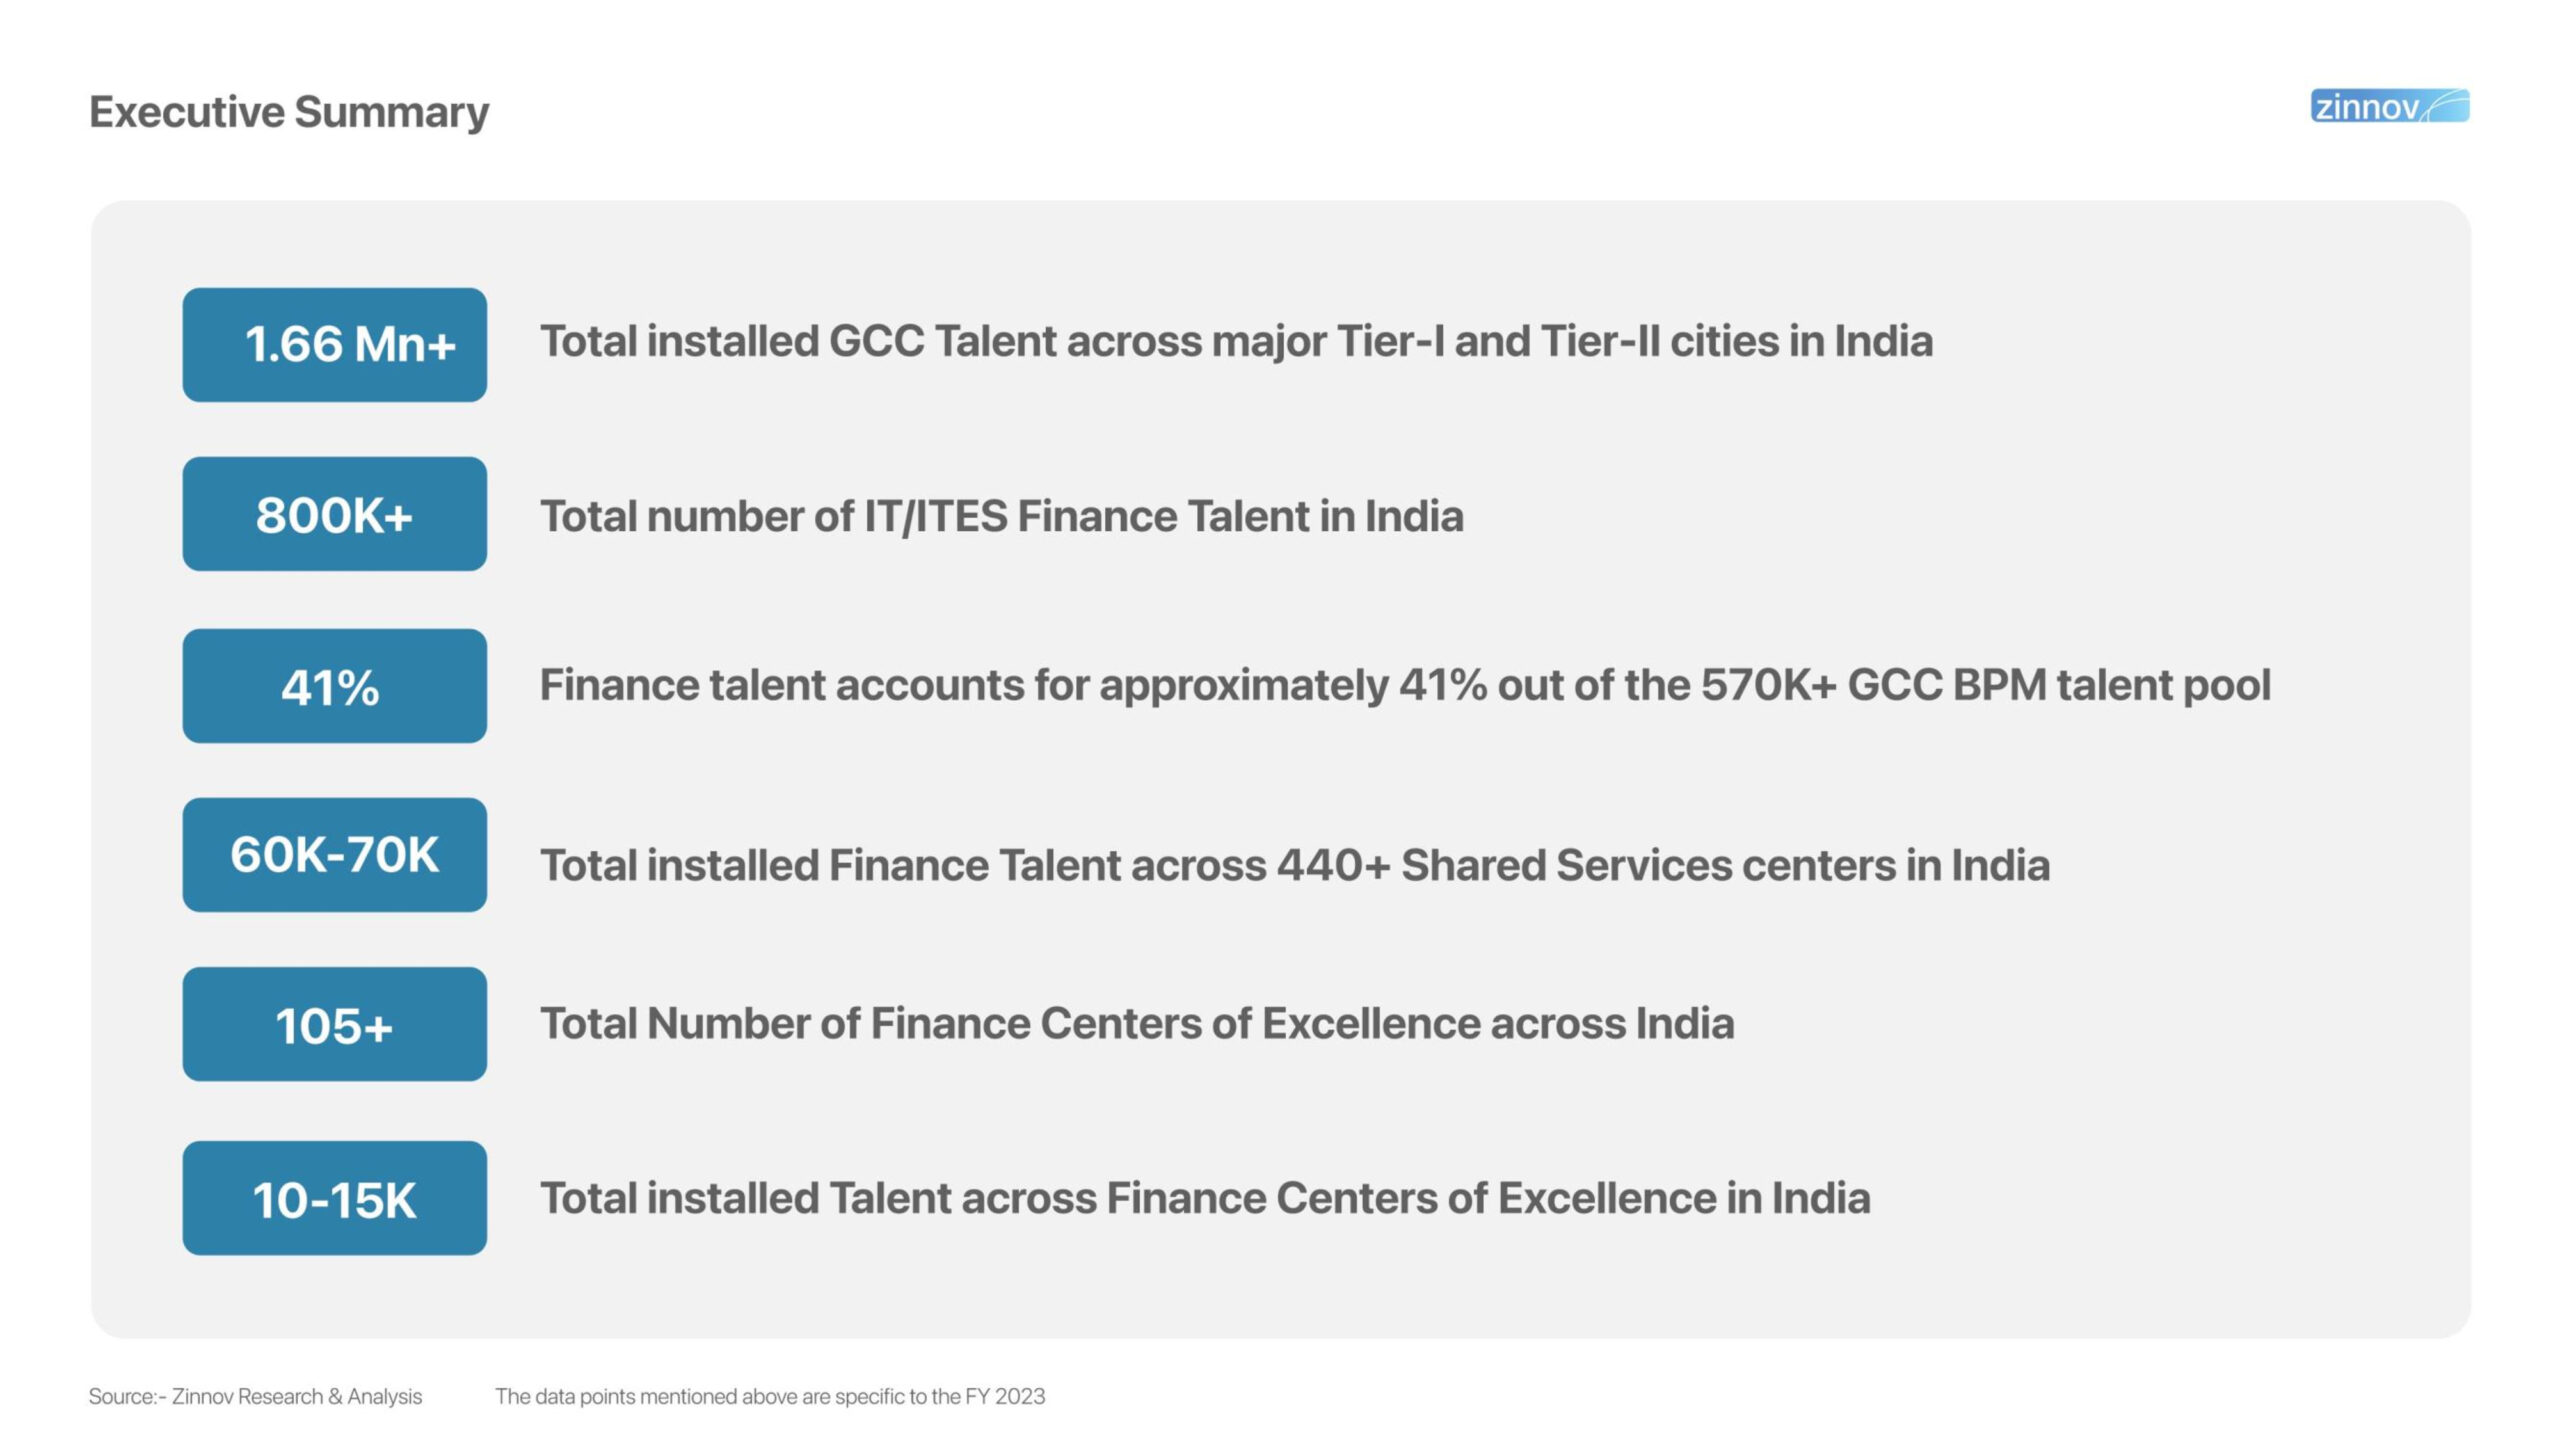 India Finance Centers Of Excellence Coes Landscape Report3 Scaled